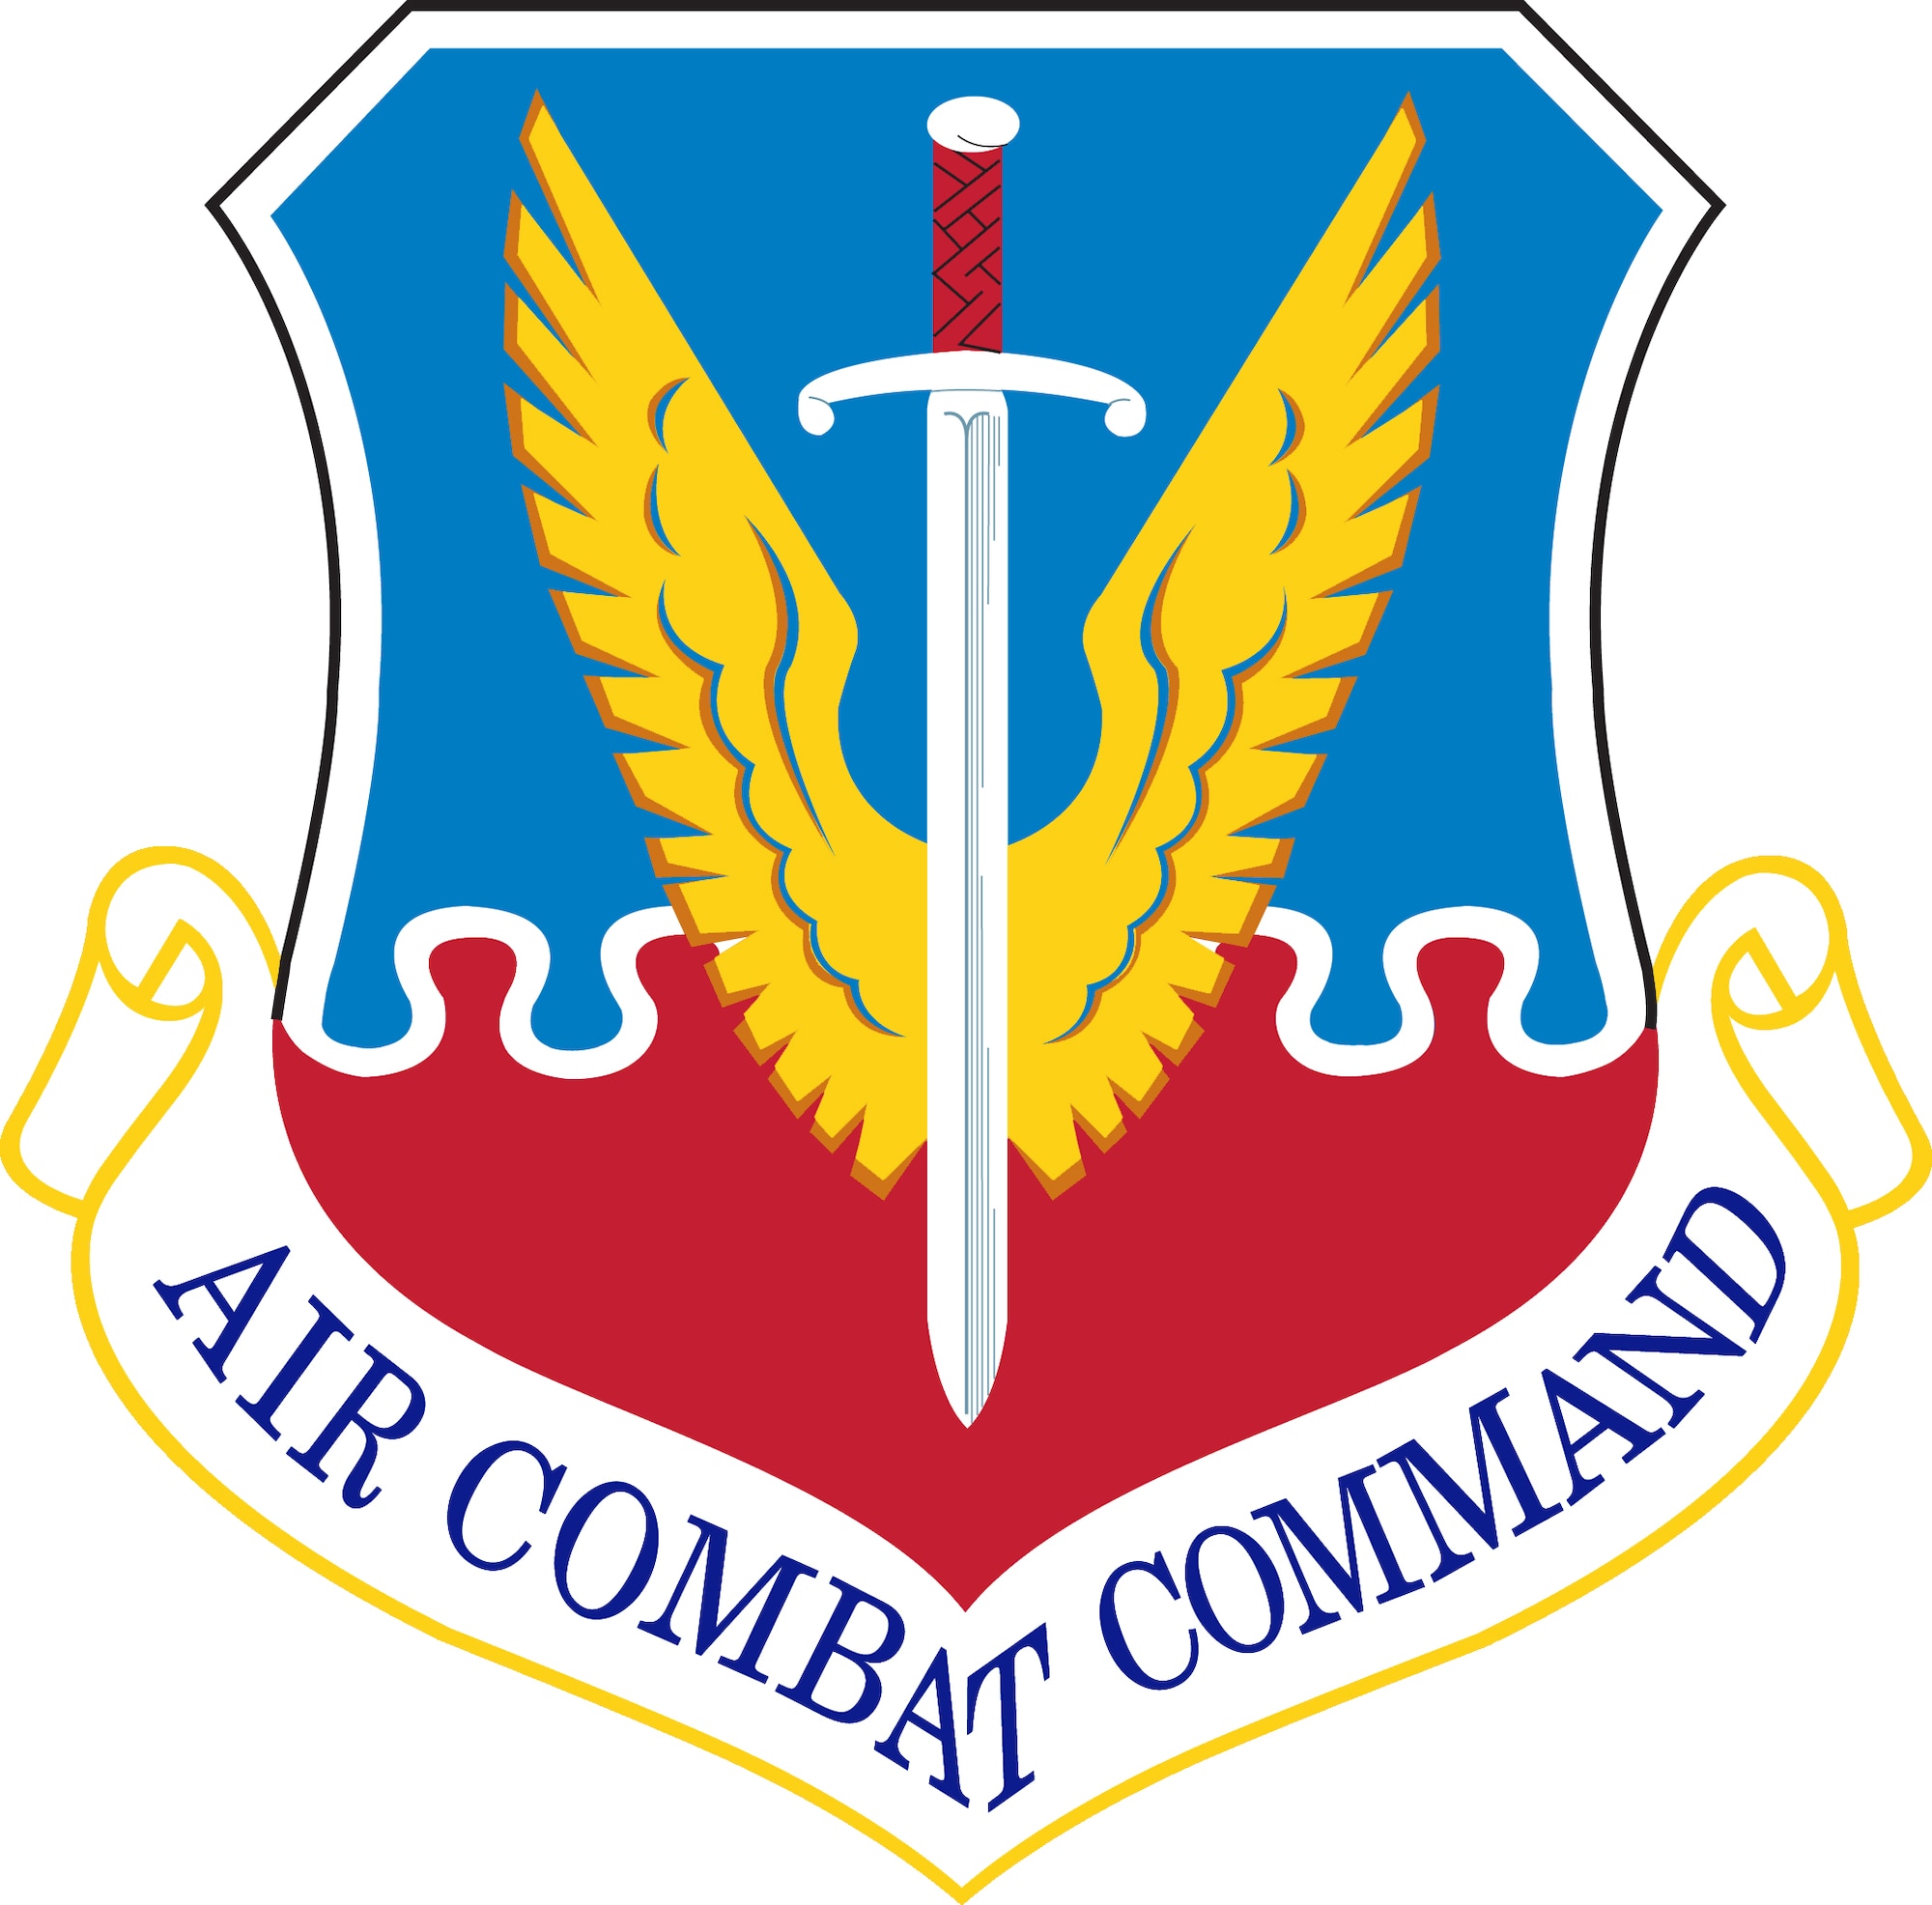 Air Combat Command (ACC) Shield (Color), U.S. Air Force graphic. In accordance with Chapter 3 of AFI 84-105, commercial reproduction of this emblem is NOT permitted without the permission of the proponent organizational/unit commander.